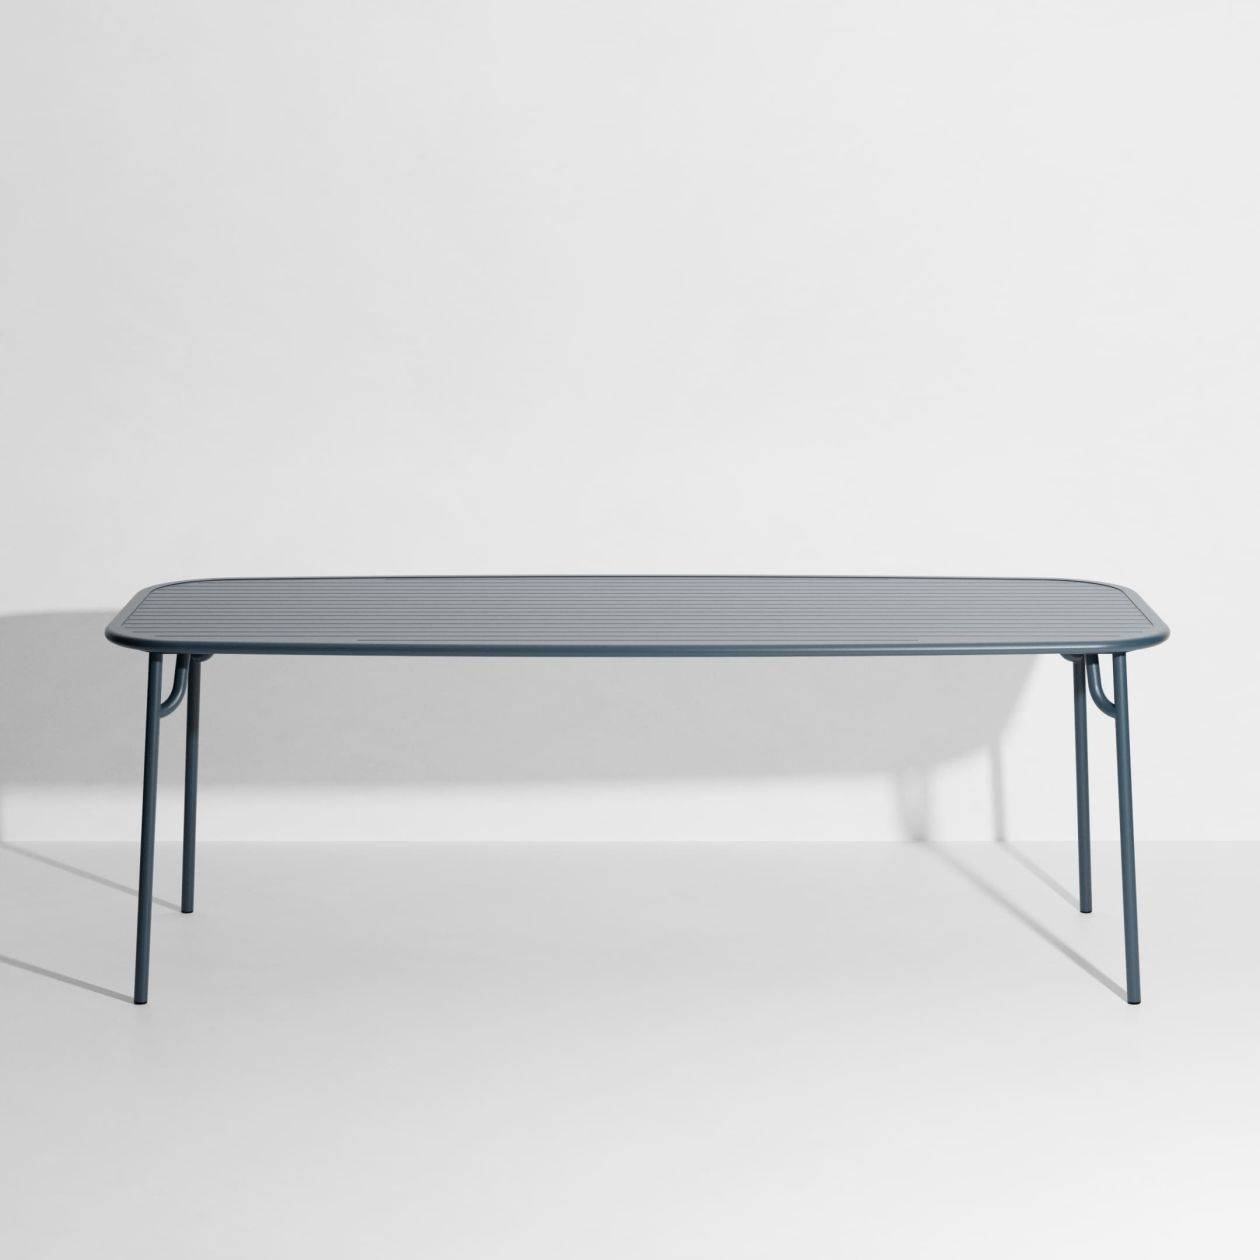 Week-End Large Rectangular Dining Table with slats - Grey blue